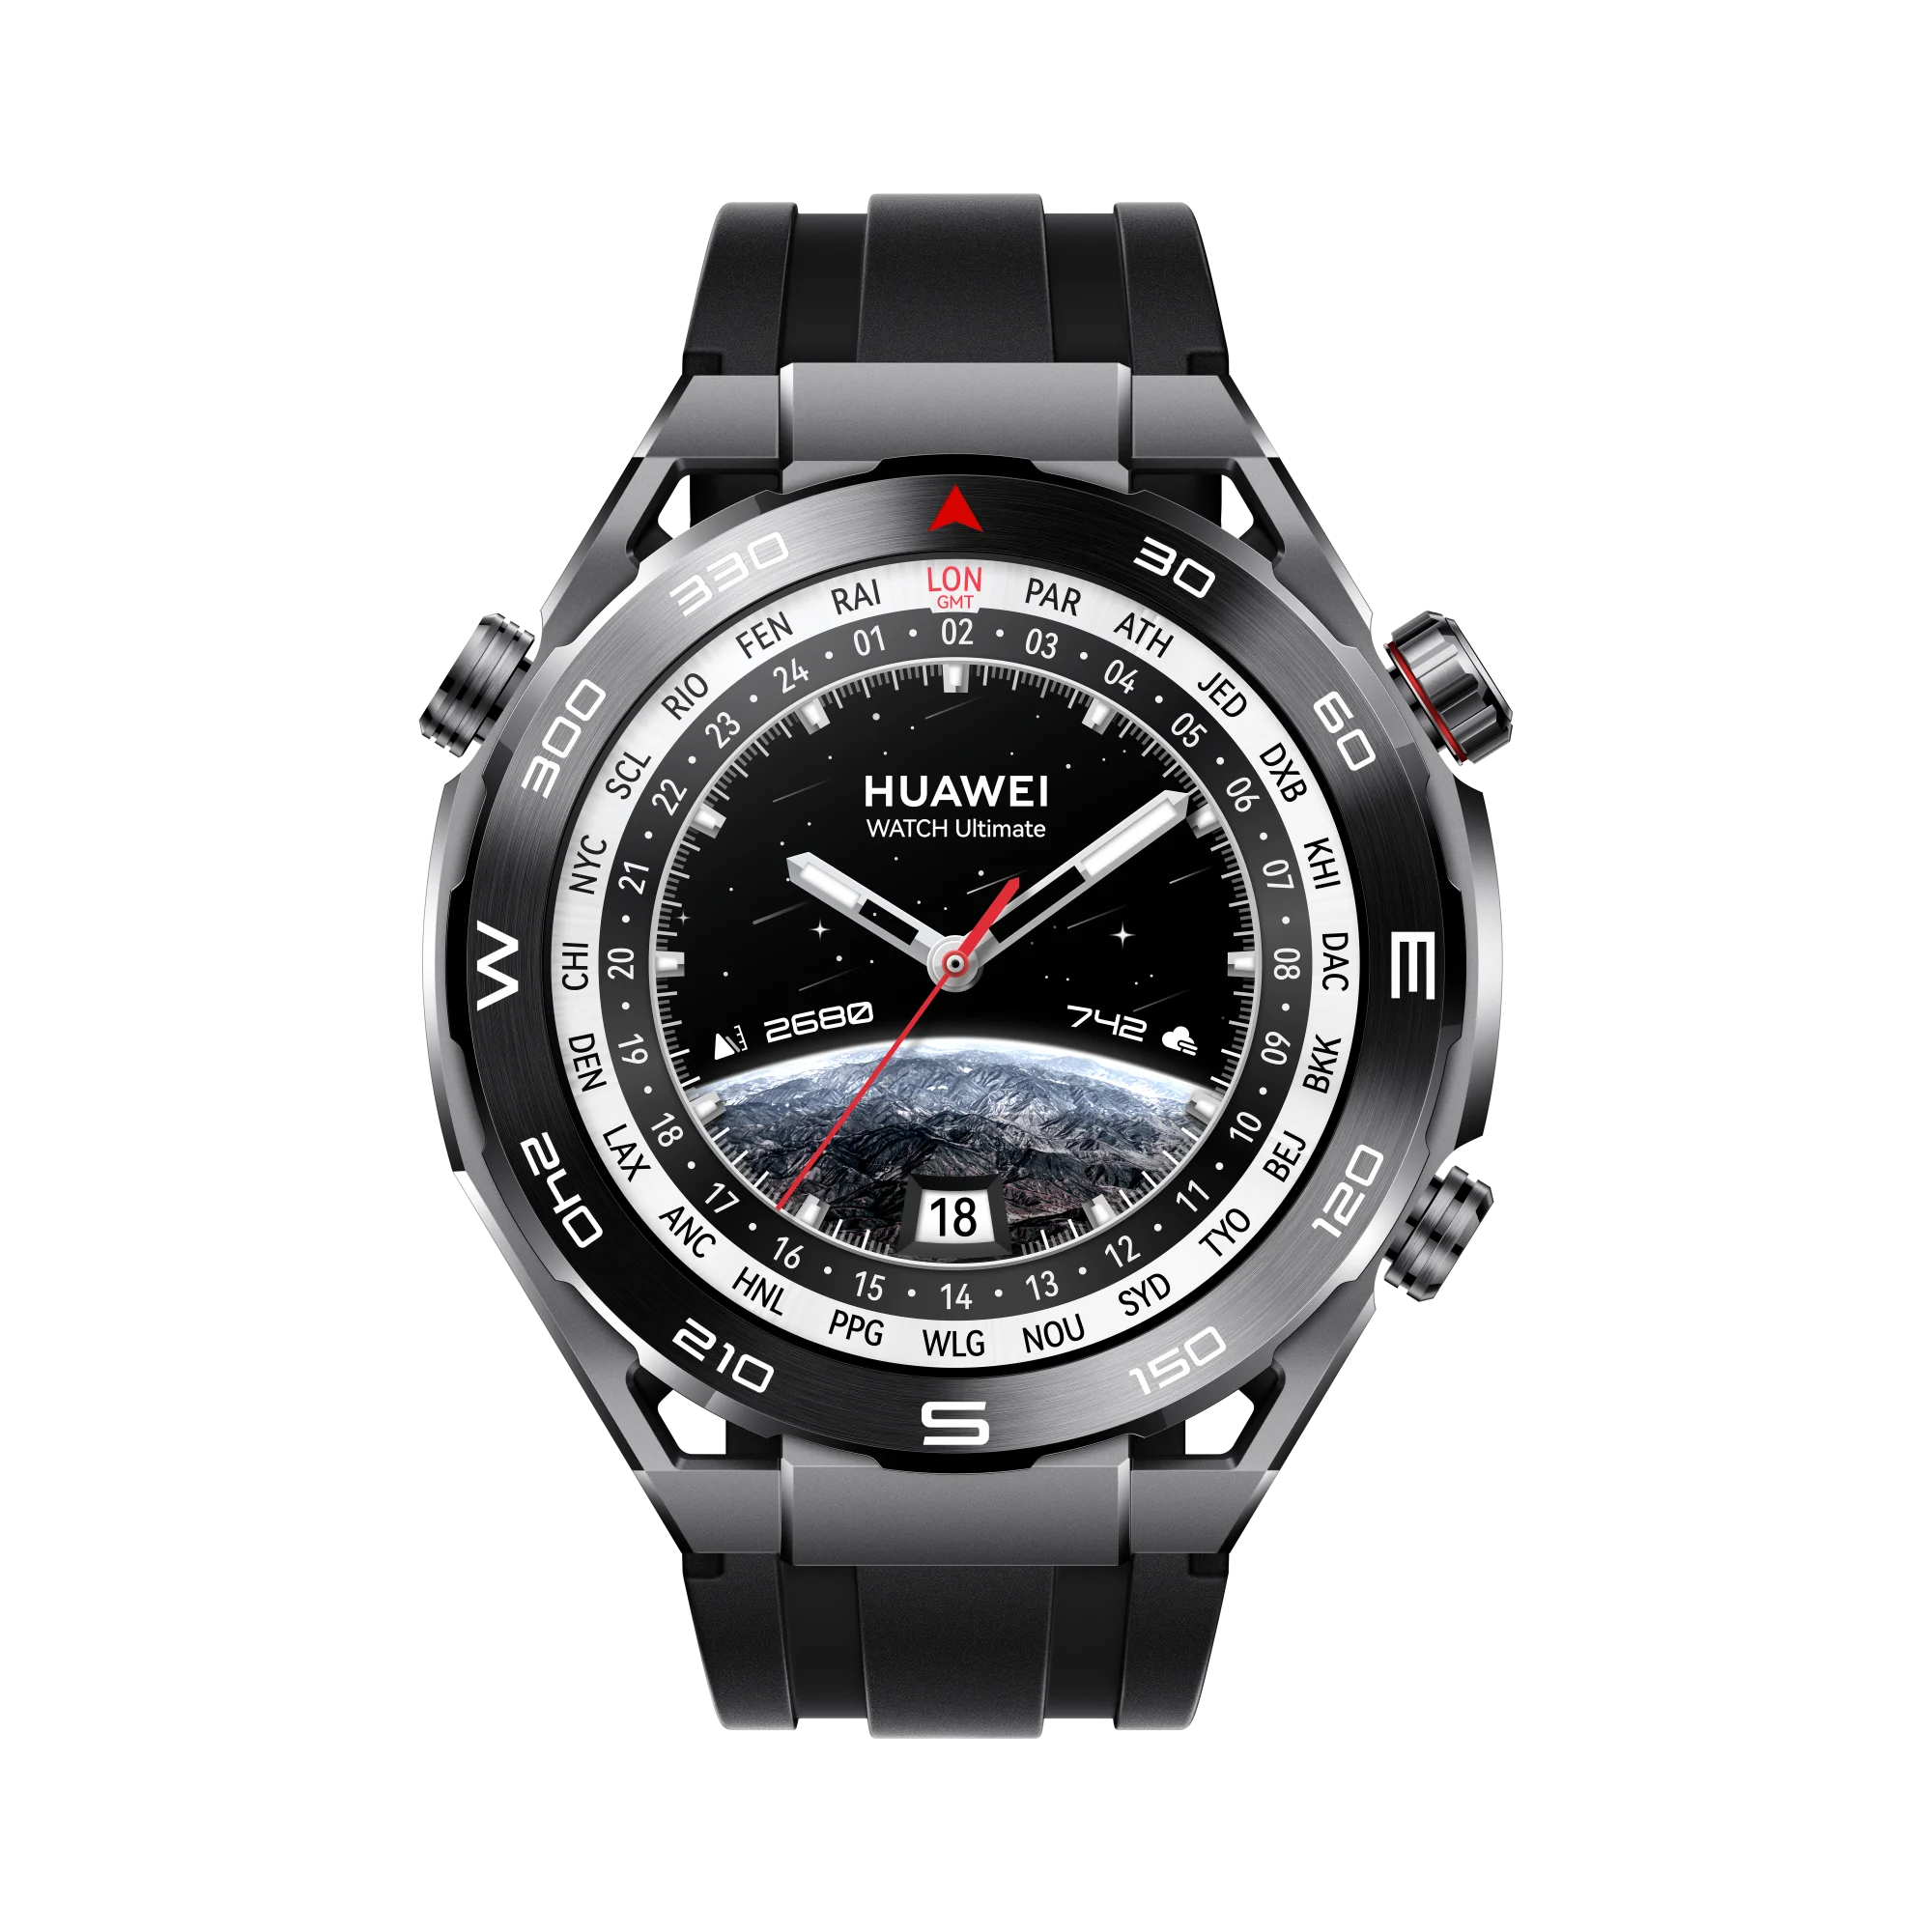 HUAWEI WATCH Ultimate Expedition smartwatch